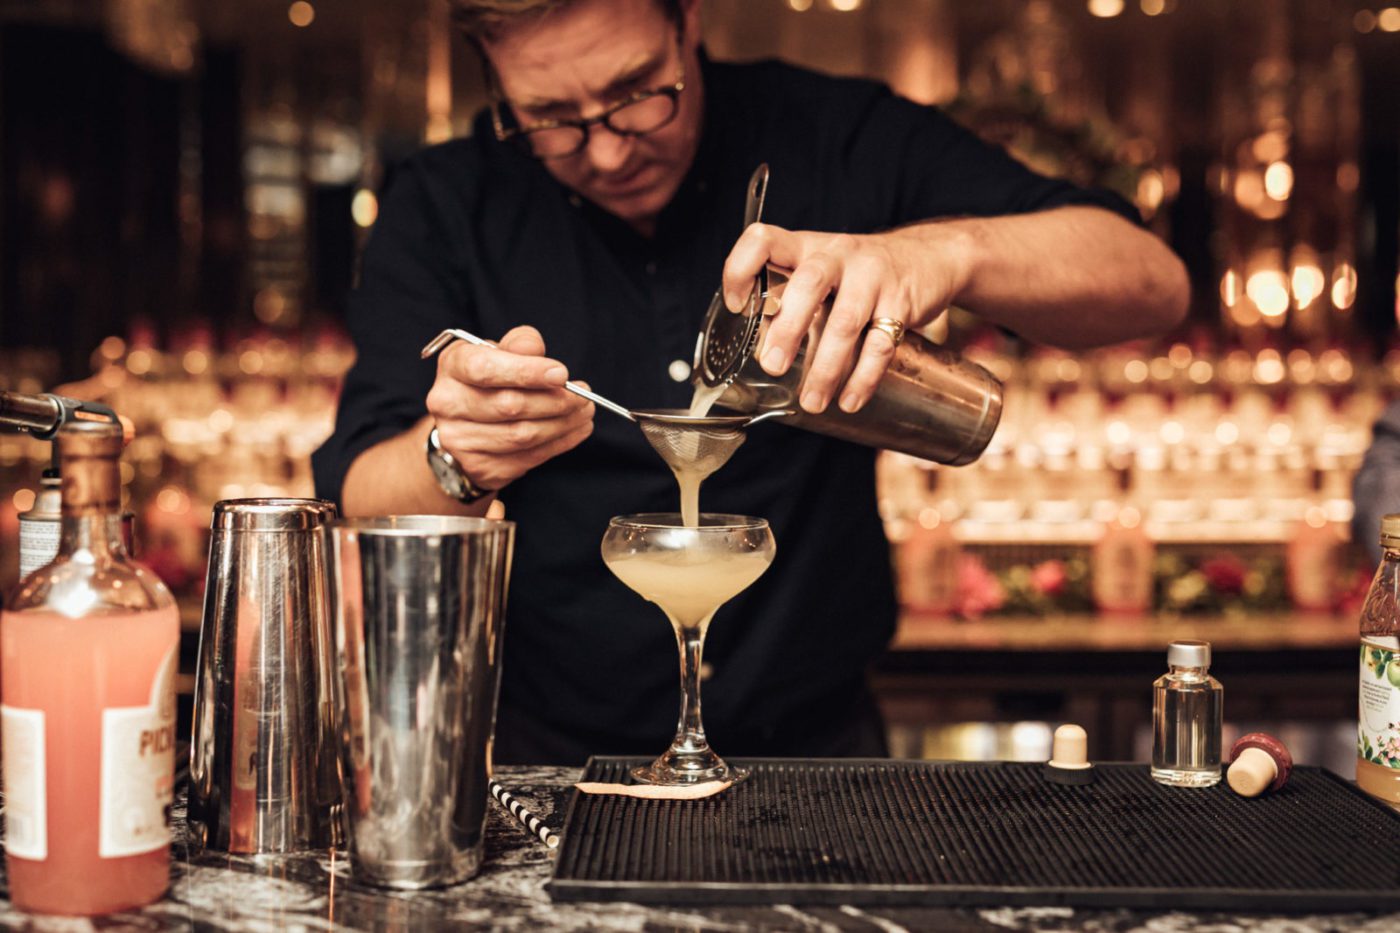 Edinburgh Cocktail Week is back and bigger than ever with a cocktail